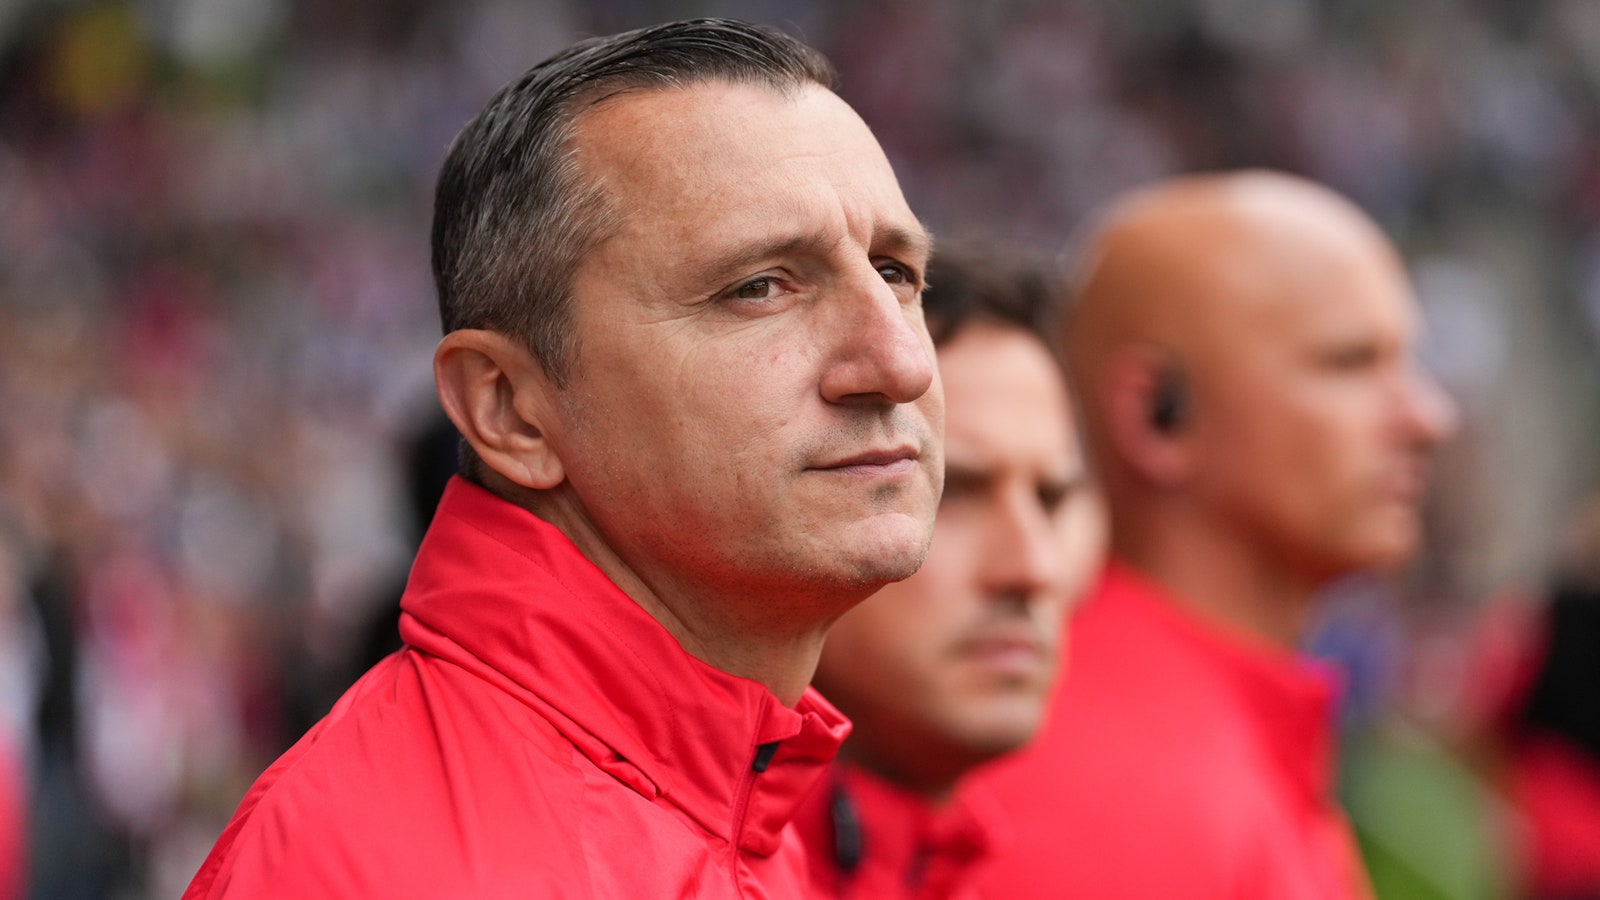 Can Vlatko Andonovski lead the USWNT to three peat wins at the 2023 Women's World Cup?